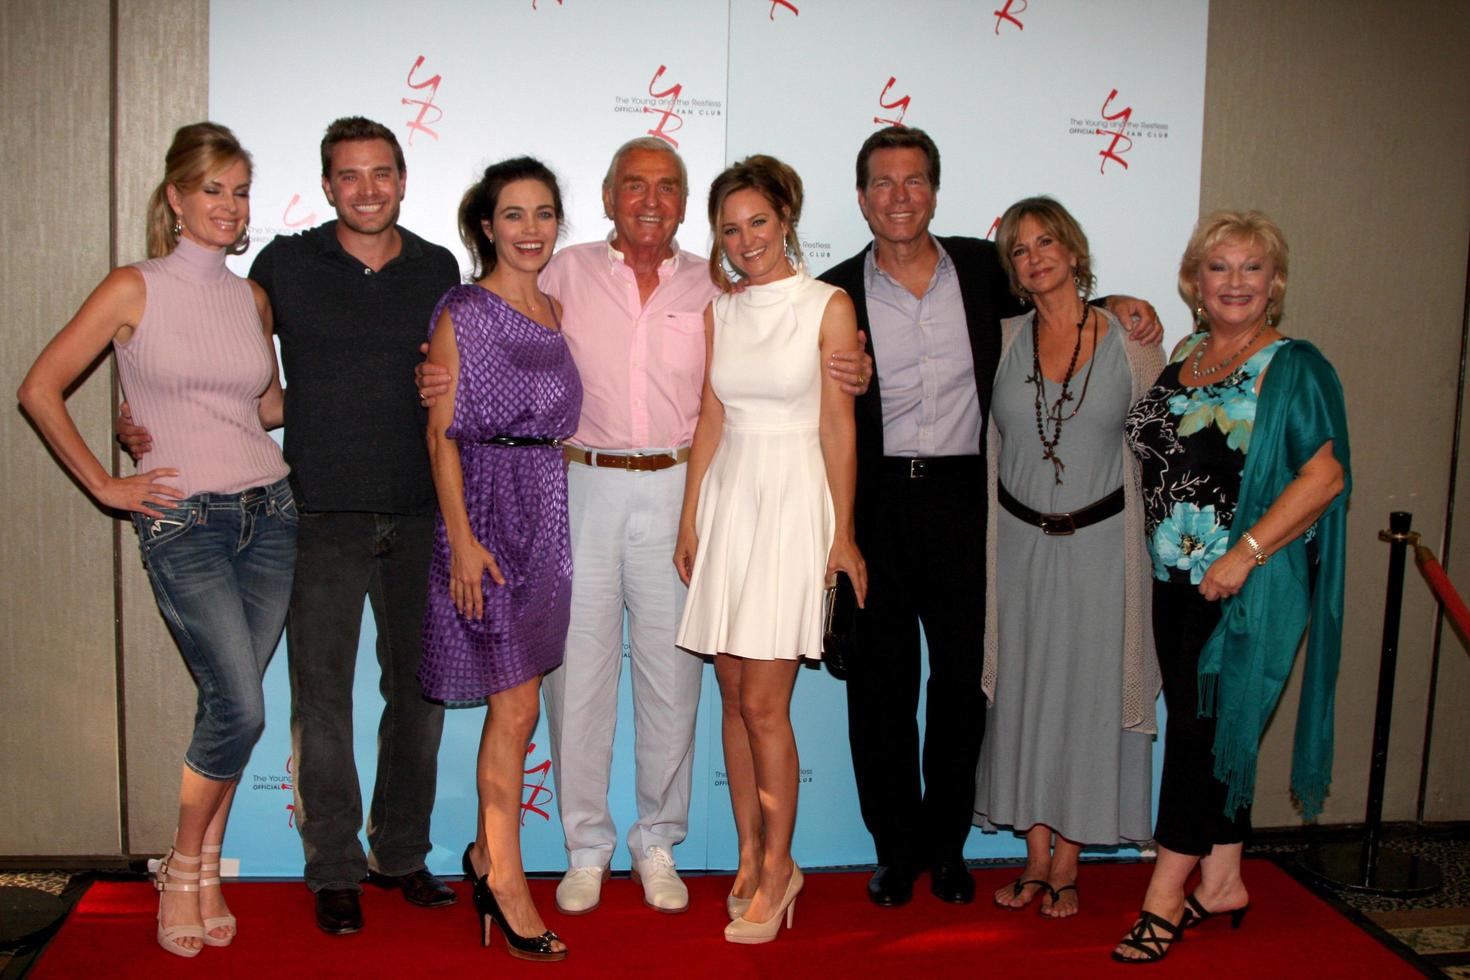 LOS ANGELES, AUG 26 - Eileen Davidson, Billy Miller, Amelia Heinle, Jerry Douglas,Sharon Case, Peter Bergman, Jess Walton, Beth Maitland attending the Young and Restless Fan Dinner 2011 at the Universal Sheraton Hotel on August 26, 2011 in Los Angeles, CA photo